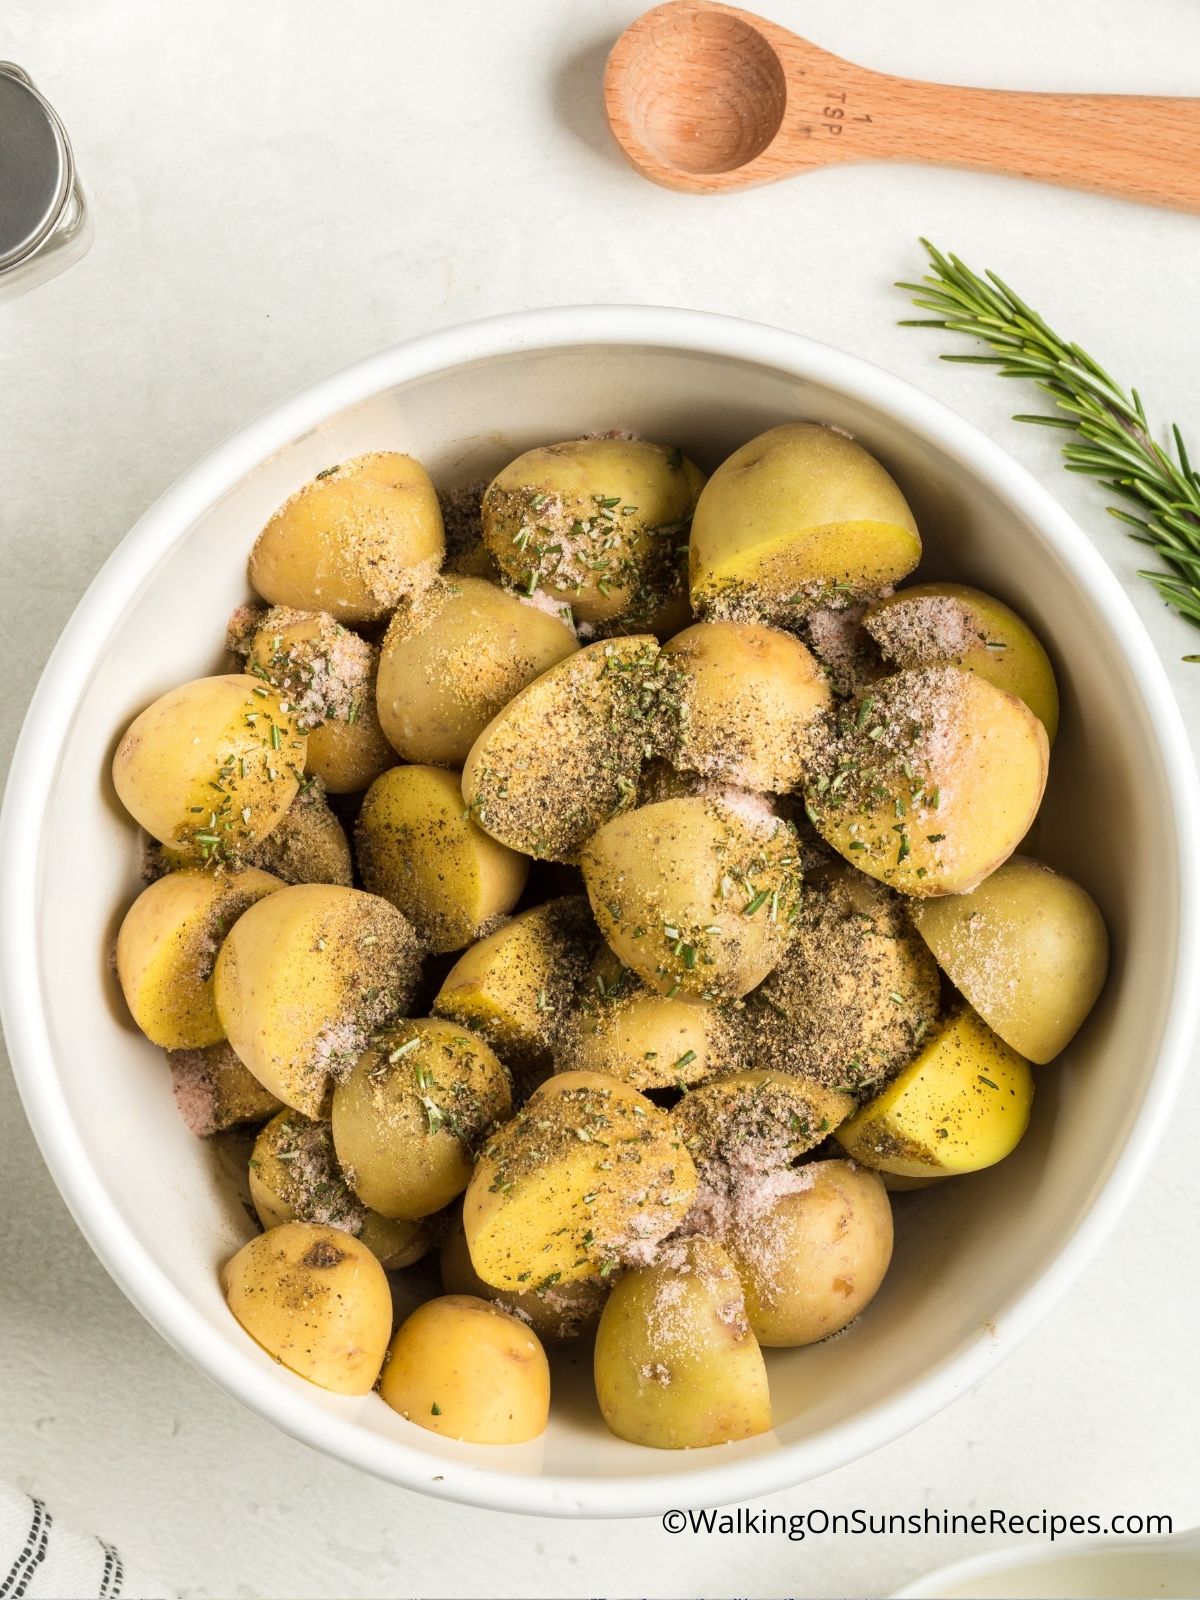 Add olive oil to potatoes.